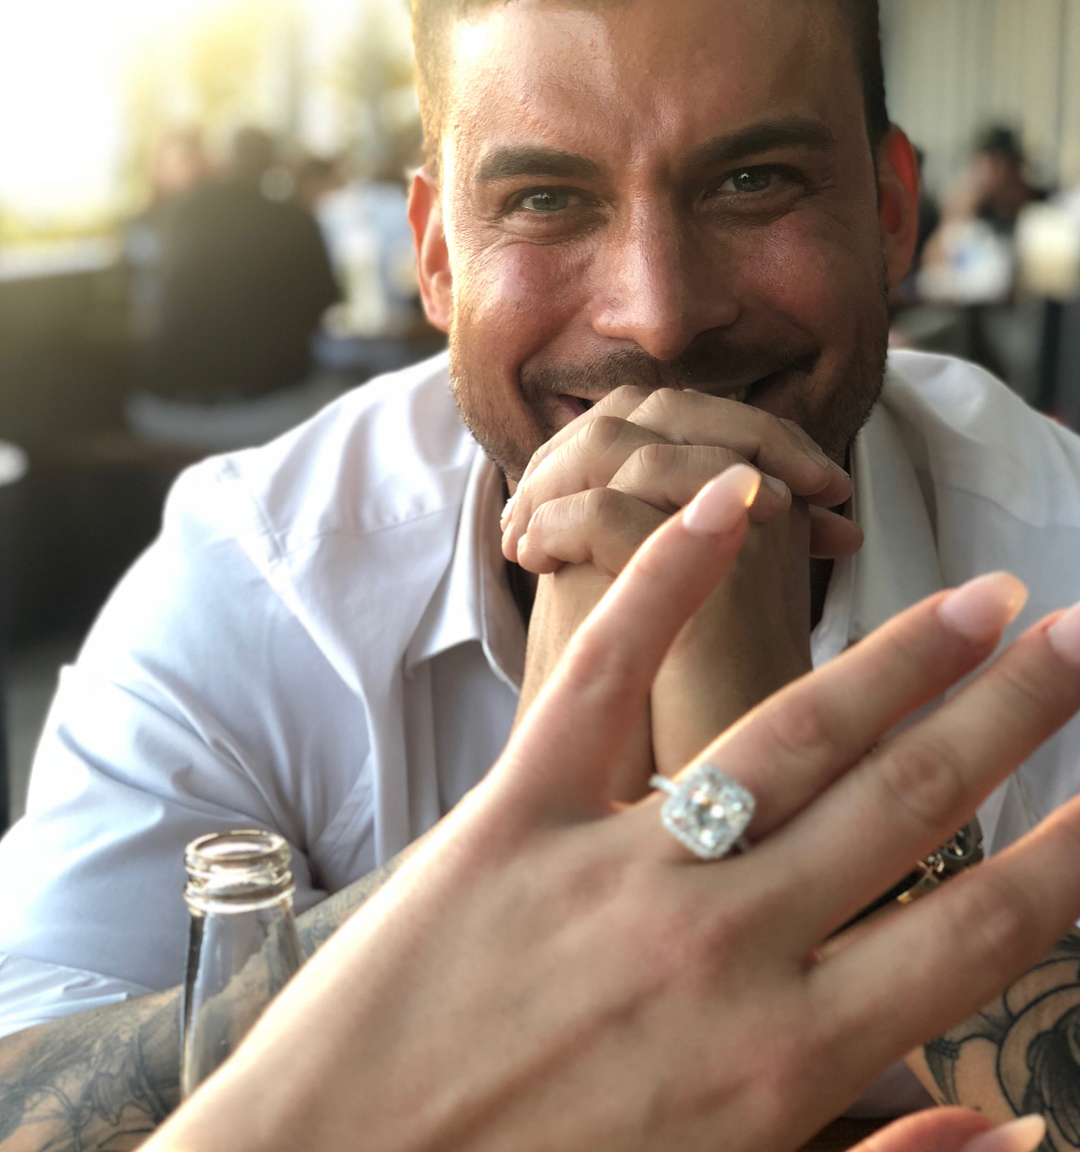 6 Jax Taylor and Brittany Cartwright engaged